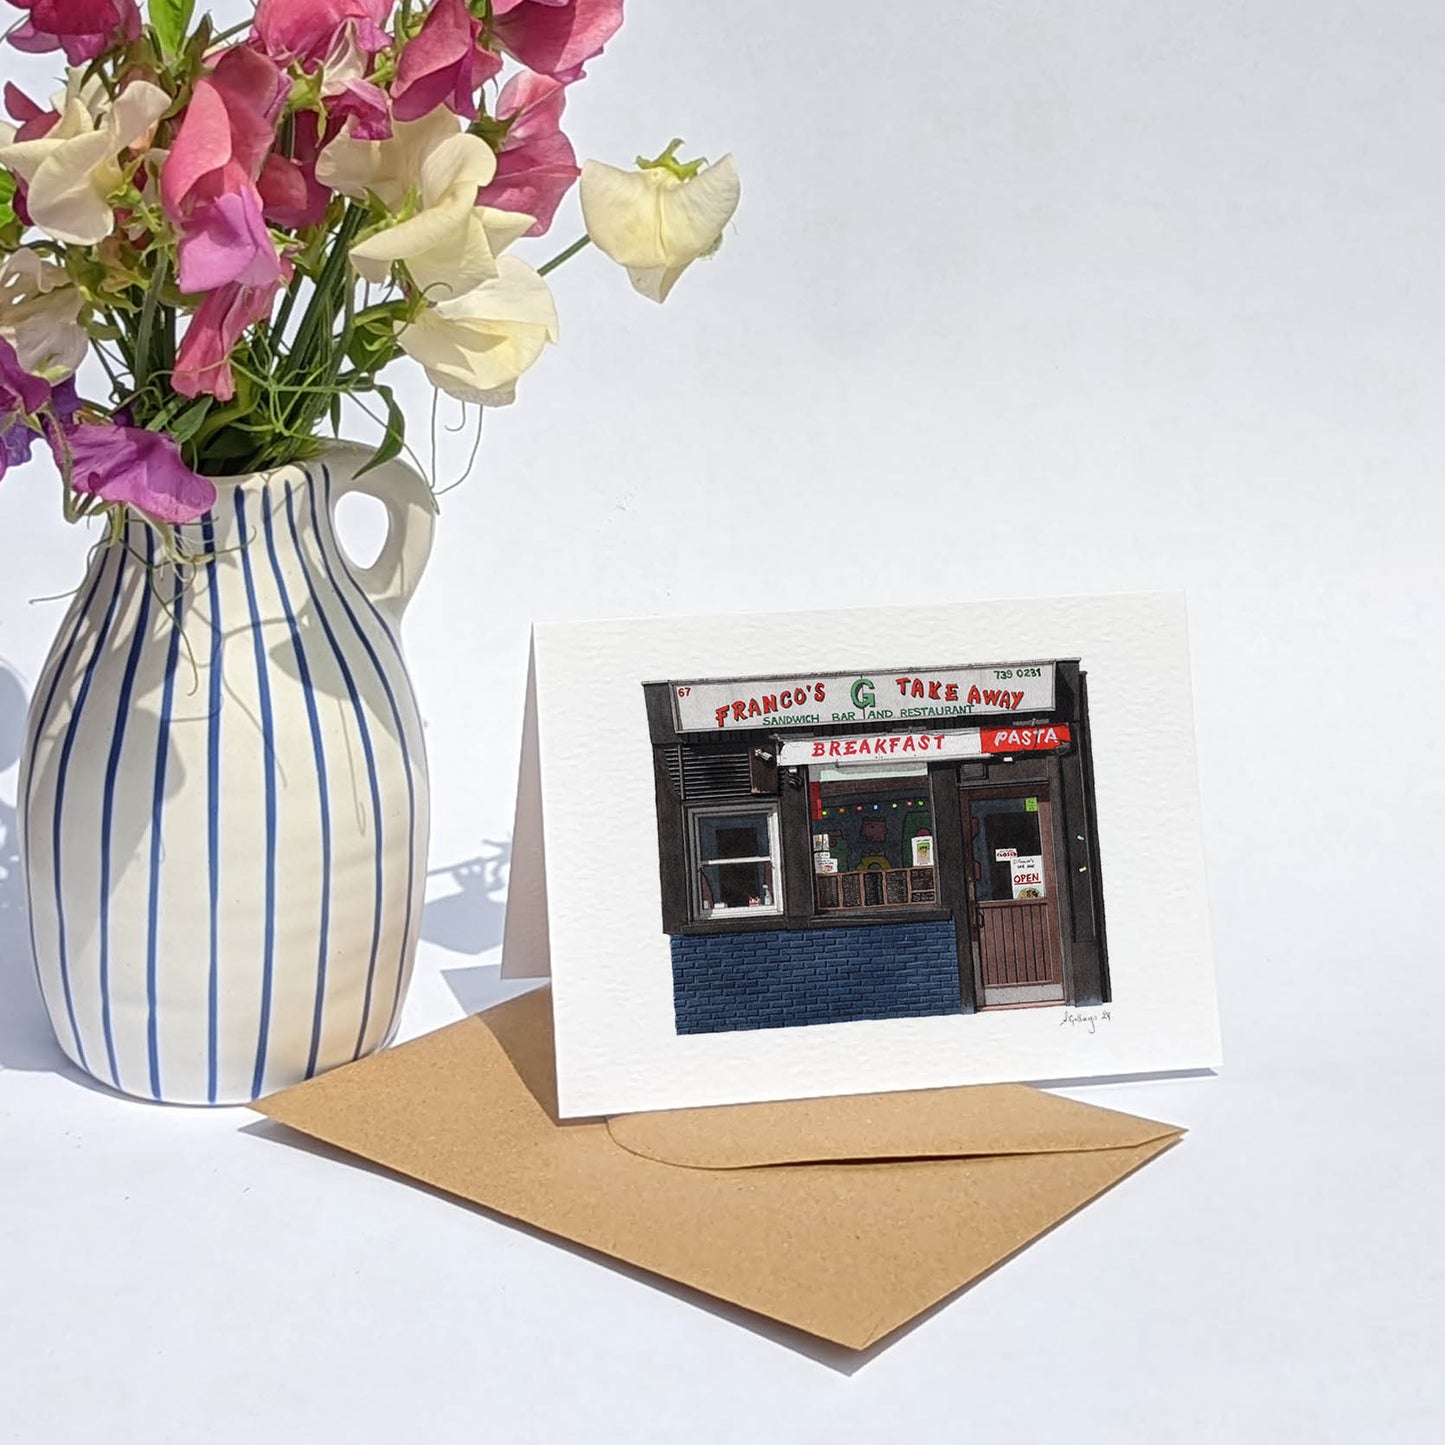 Shoreditch - Franco's Take Away - Greeting card with envelope